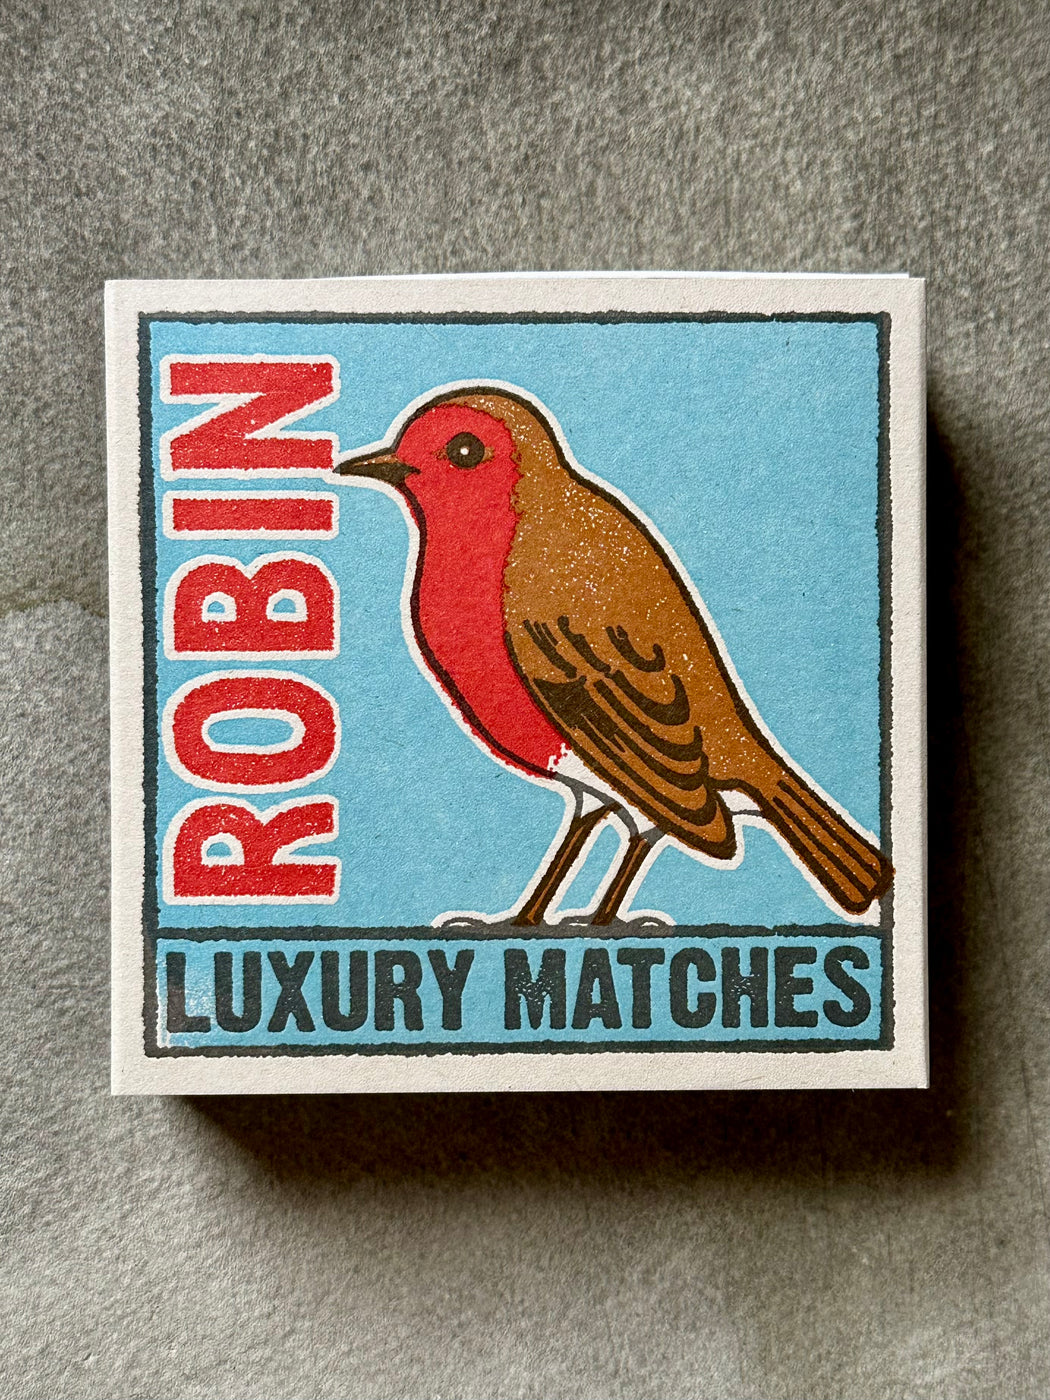 "The Robin" Matches by Archivist Gallery